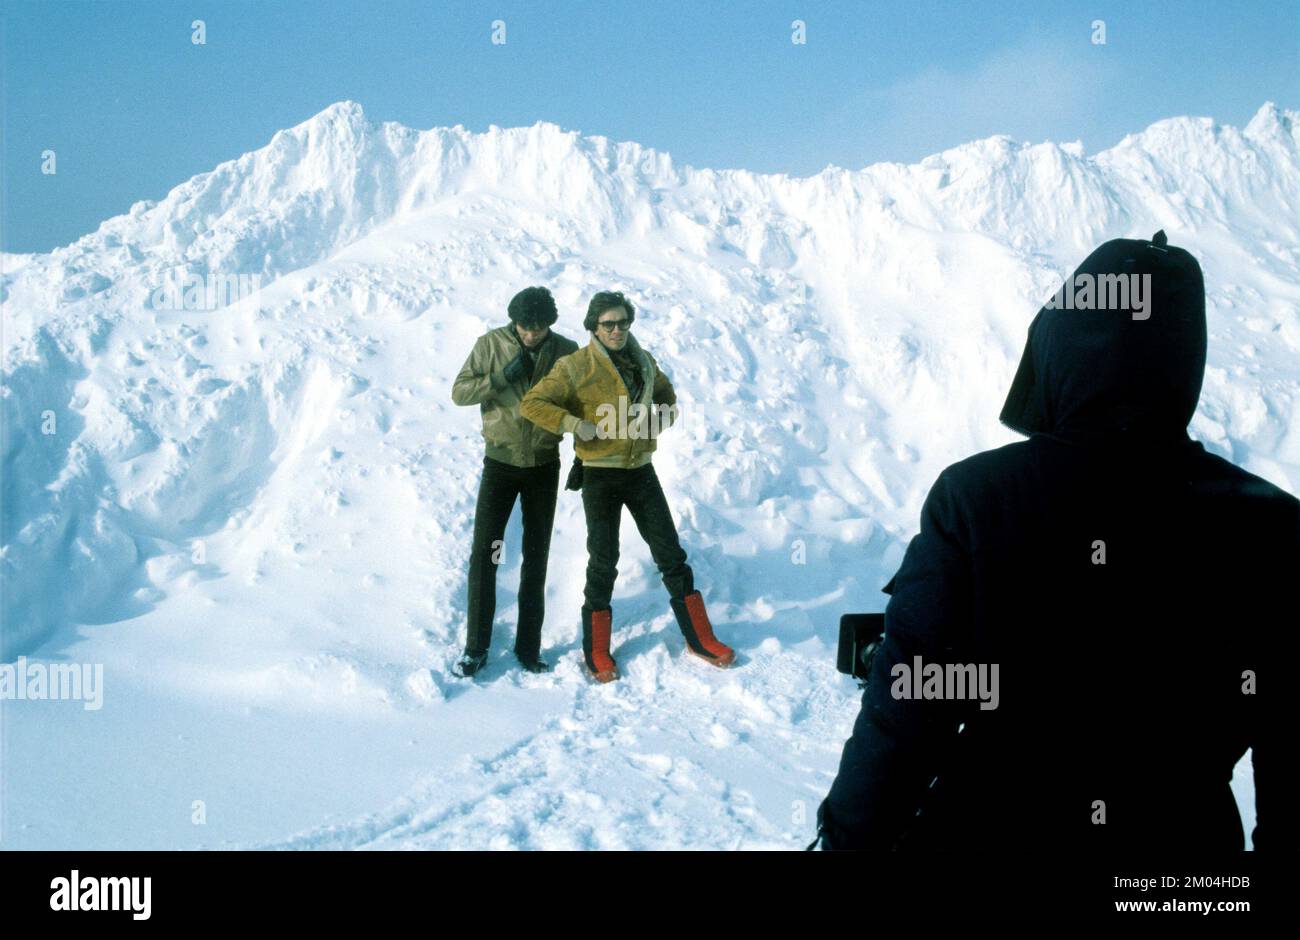 Fashion in the 1980s. Two young male models standing in the snow for a photo shoot. They are wearing warm winter jackets and trousers and one of them the decades typical winter boots. Sweden march 1980 Stock Photo